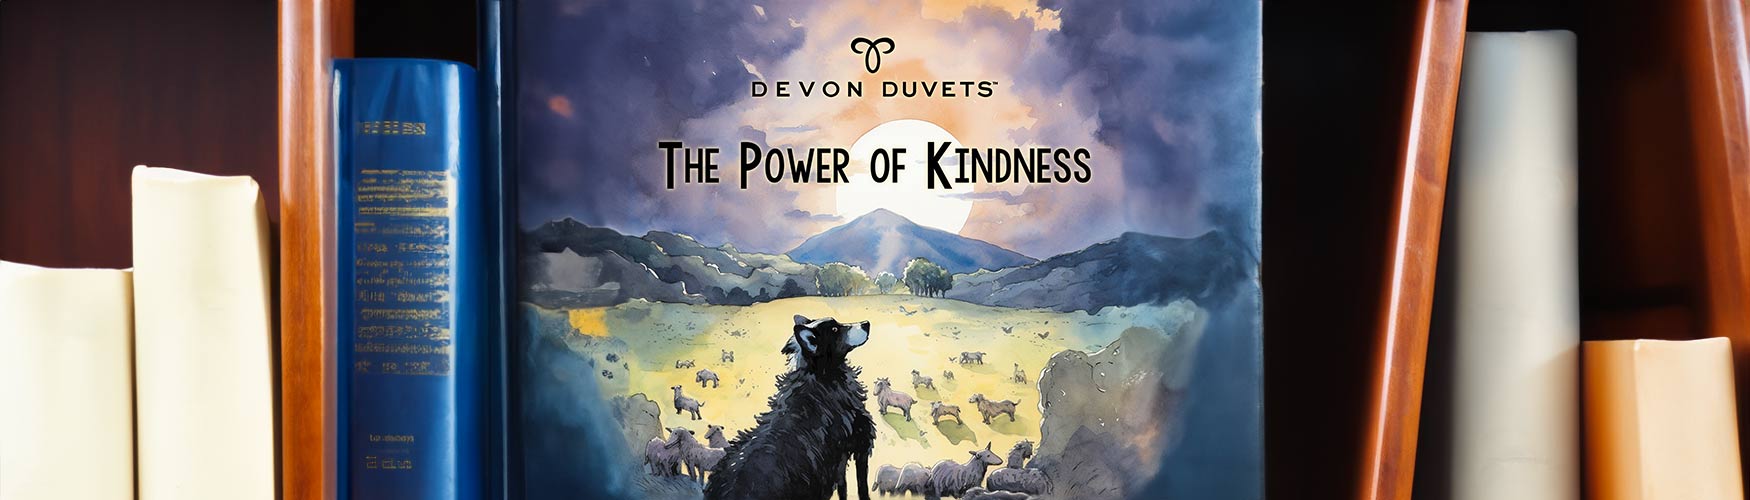 Illustrated cover of a bedtime story 'The Power of Kindness', a tale of compassion and dreams.